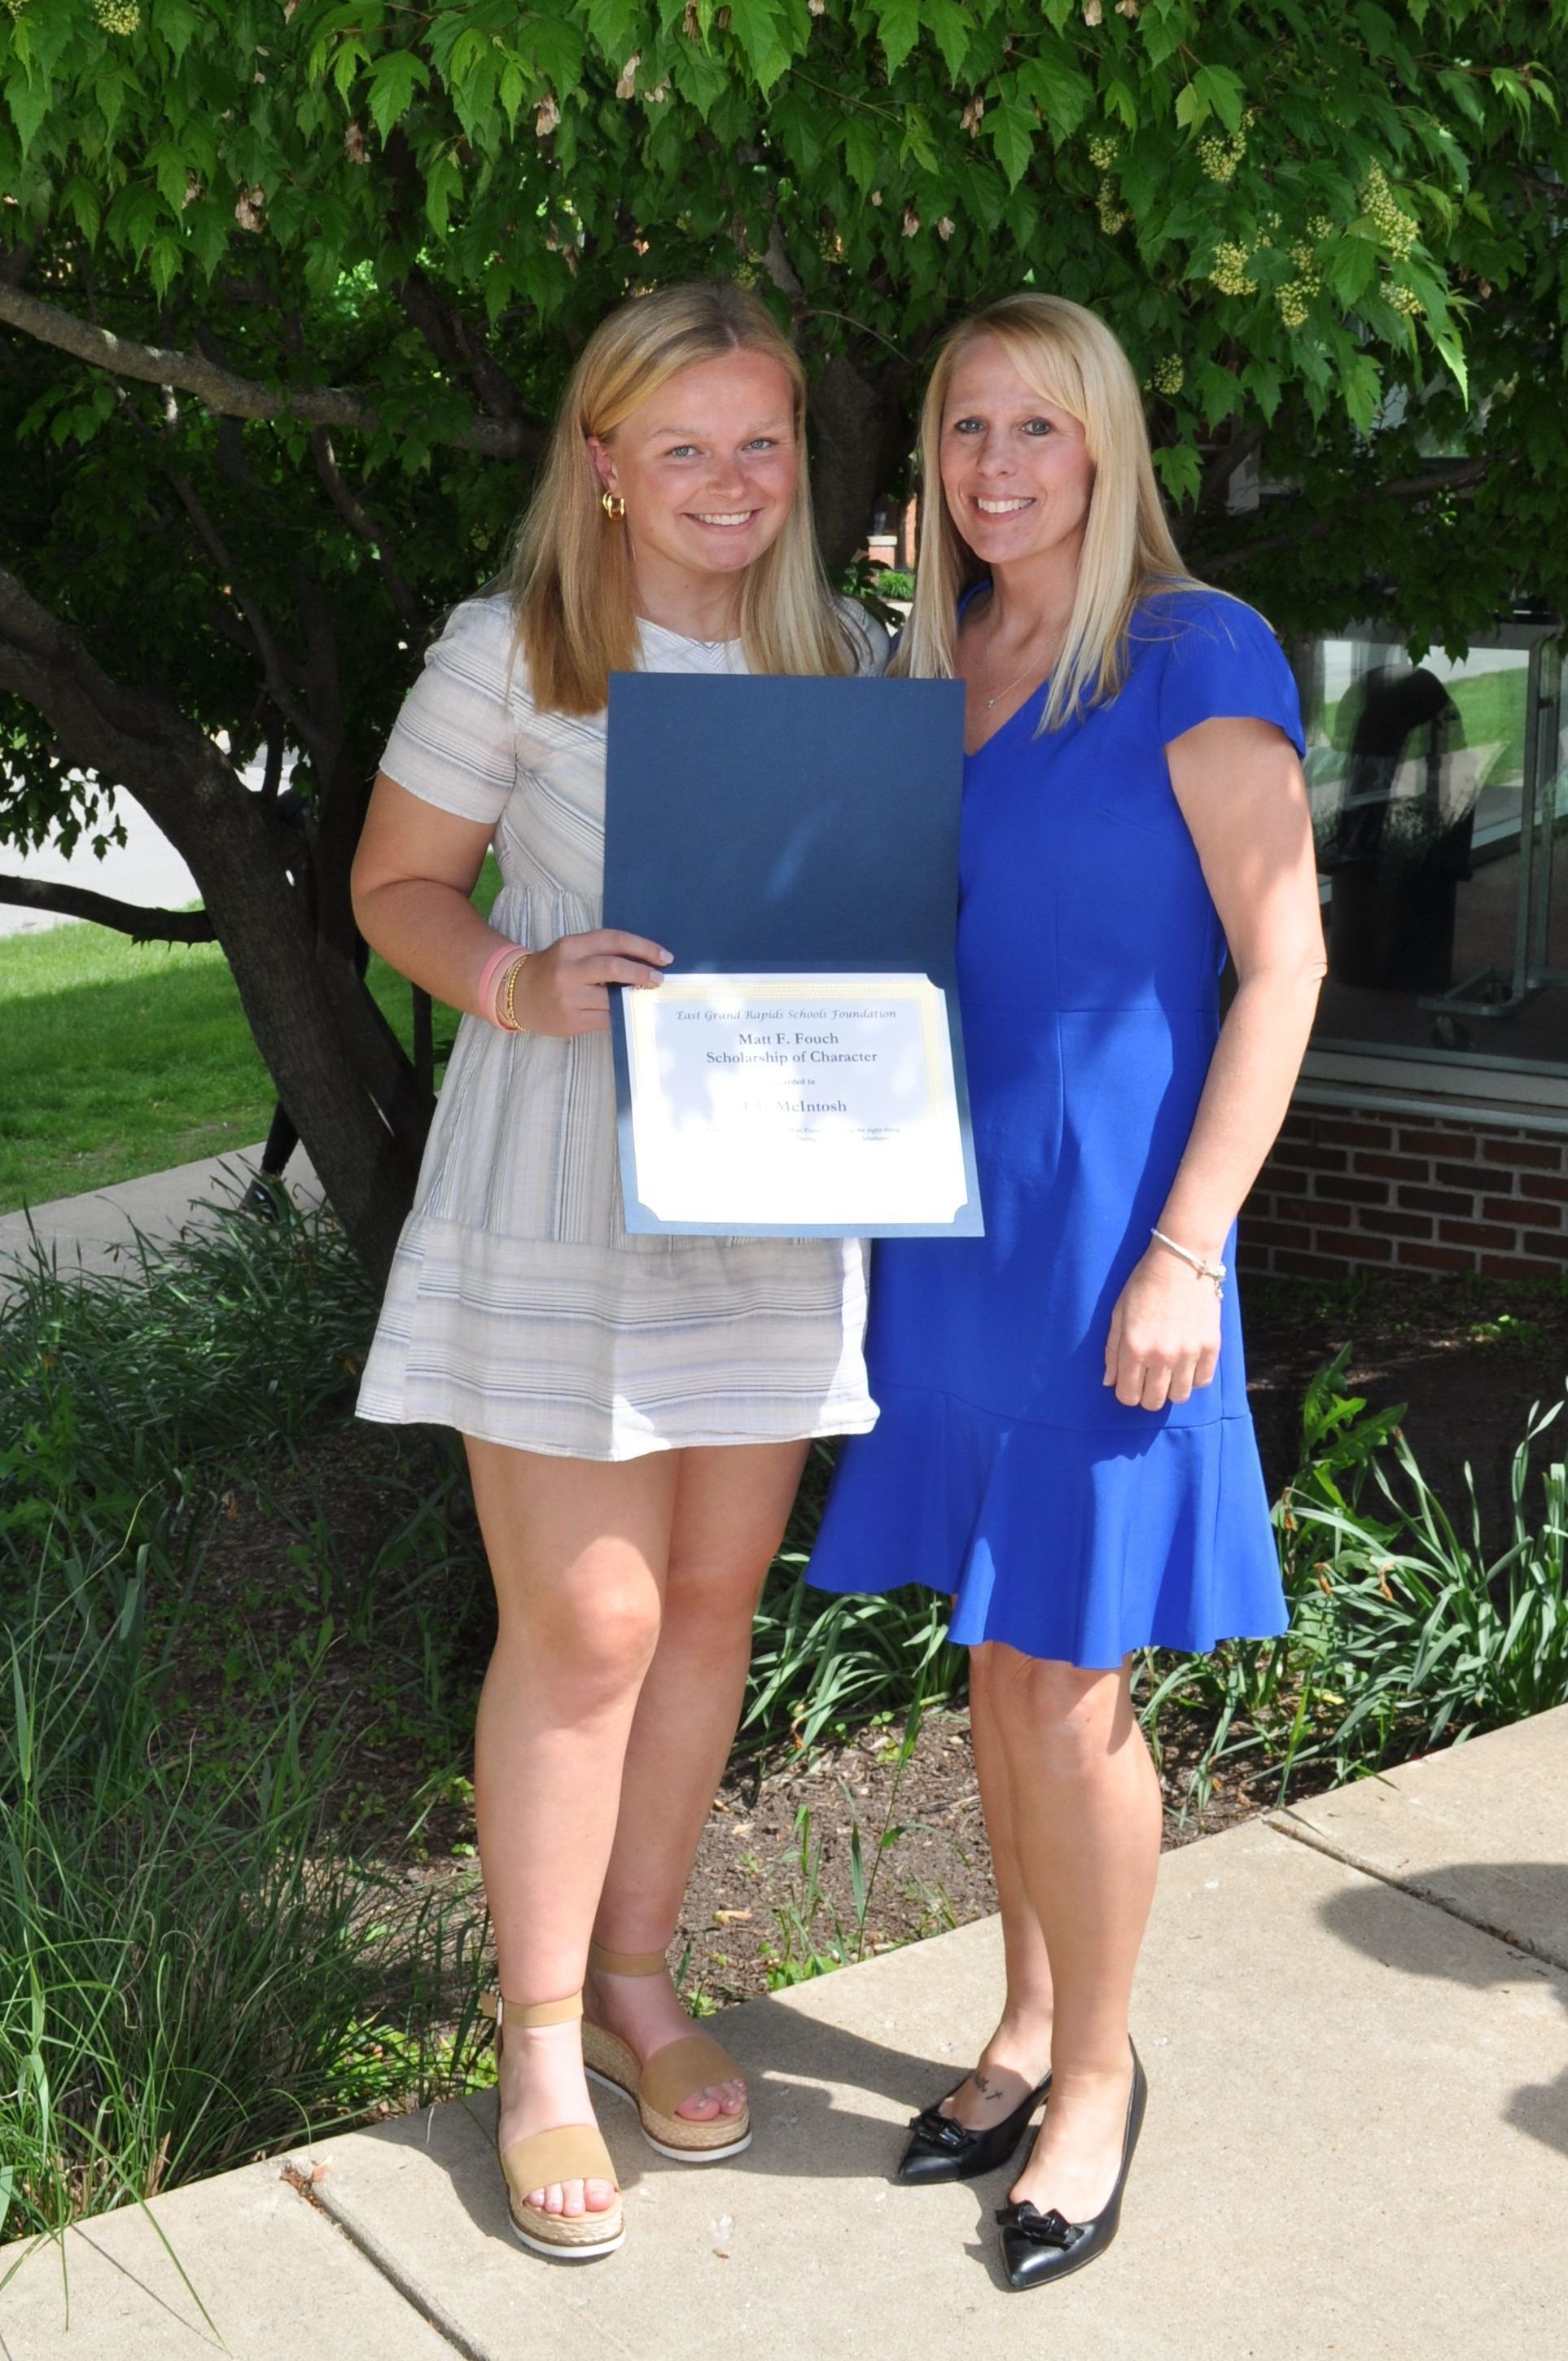 Lily McIntosh - Matt F. Fouch Scholarship of Character